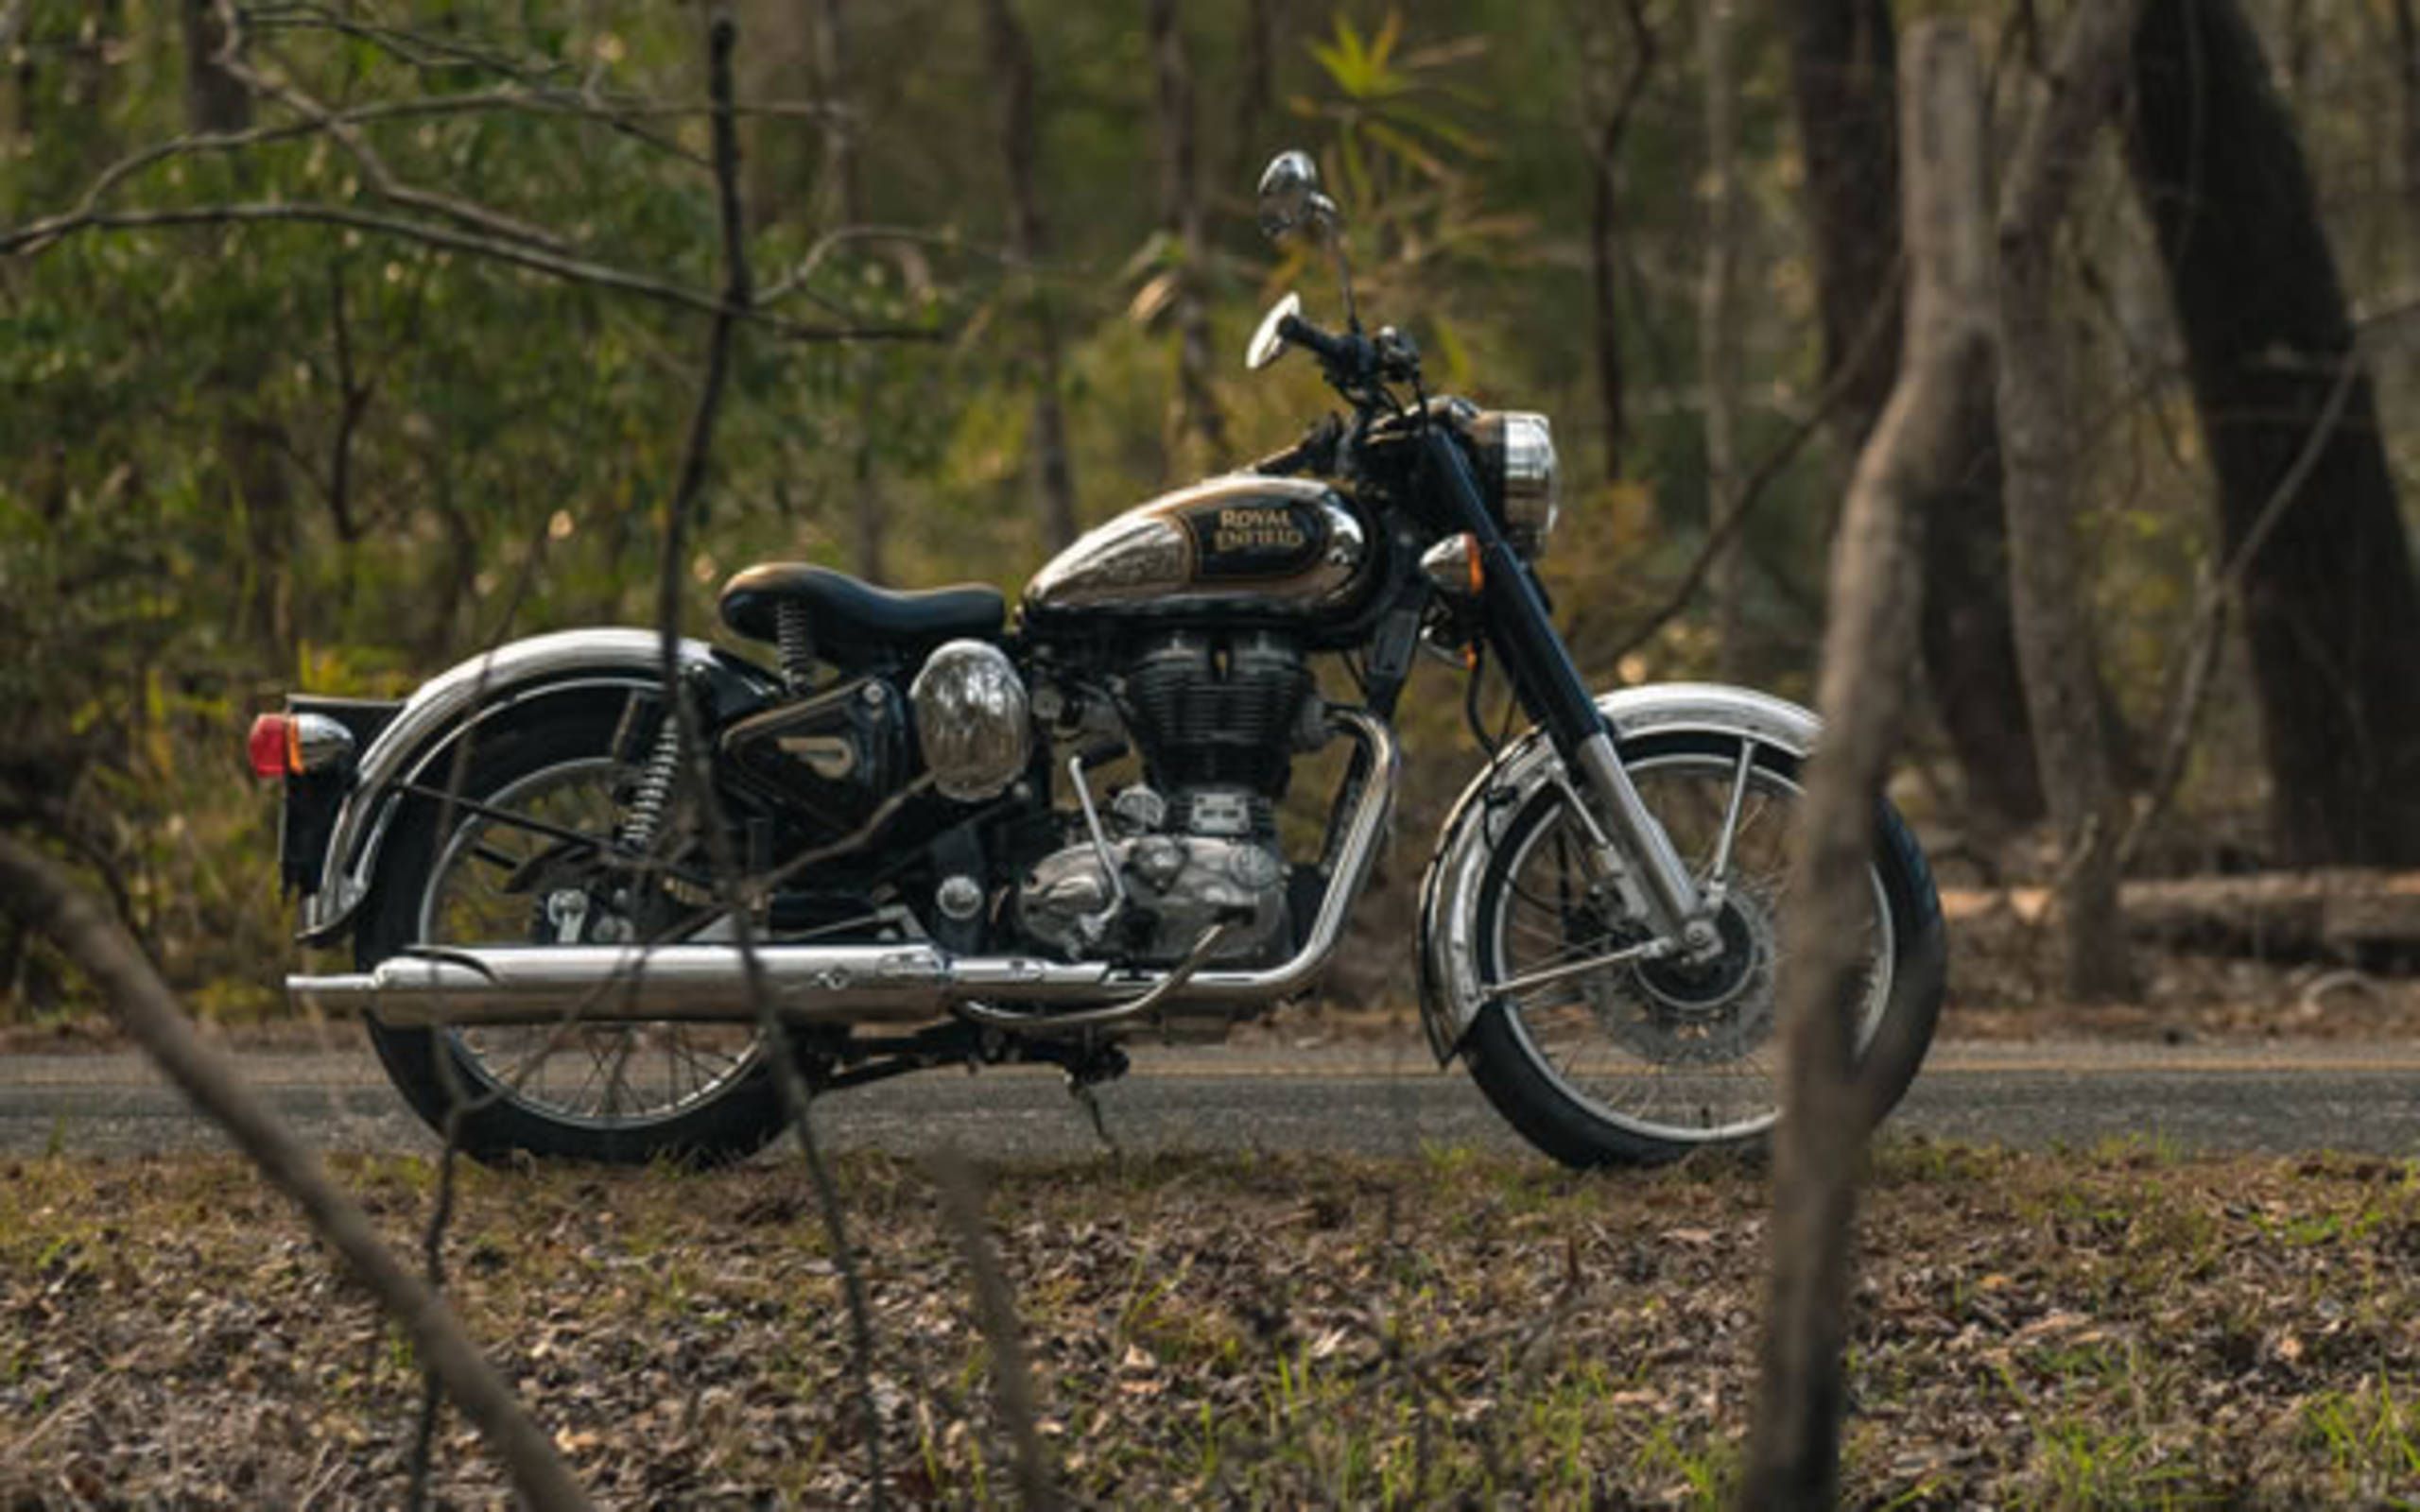 Royal Enfield Renaissance is an old story. Here is what's driving